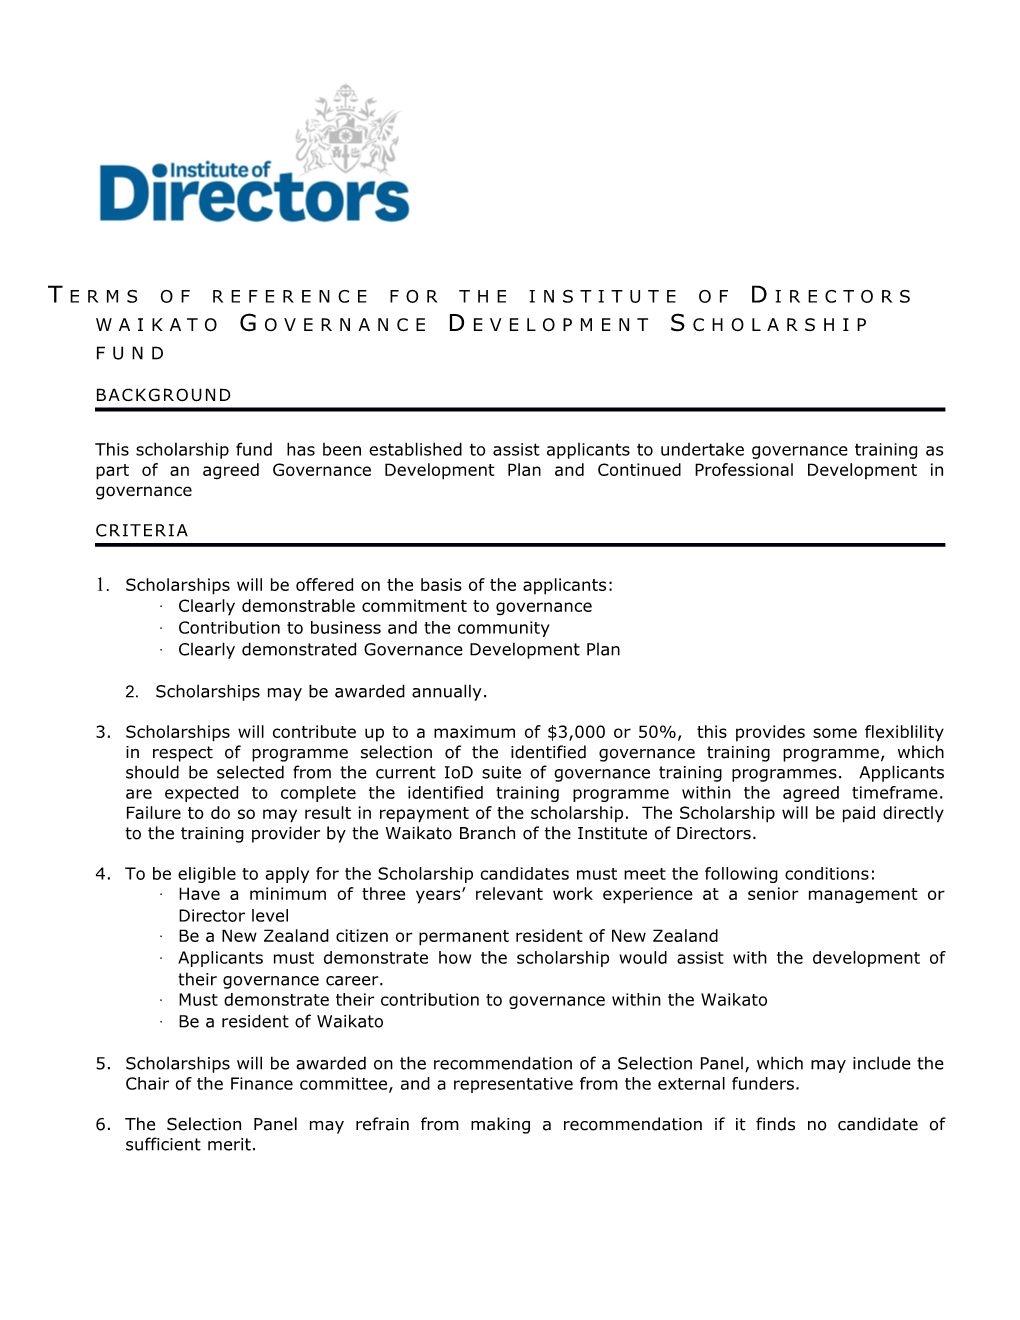 Terms of Reference for the Institute of Directors Waikatogovernance Development Scholarship Fund